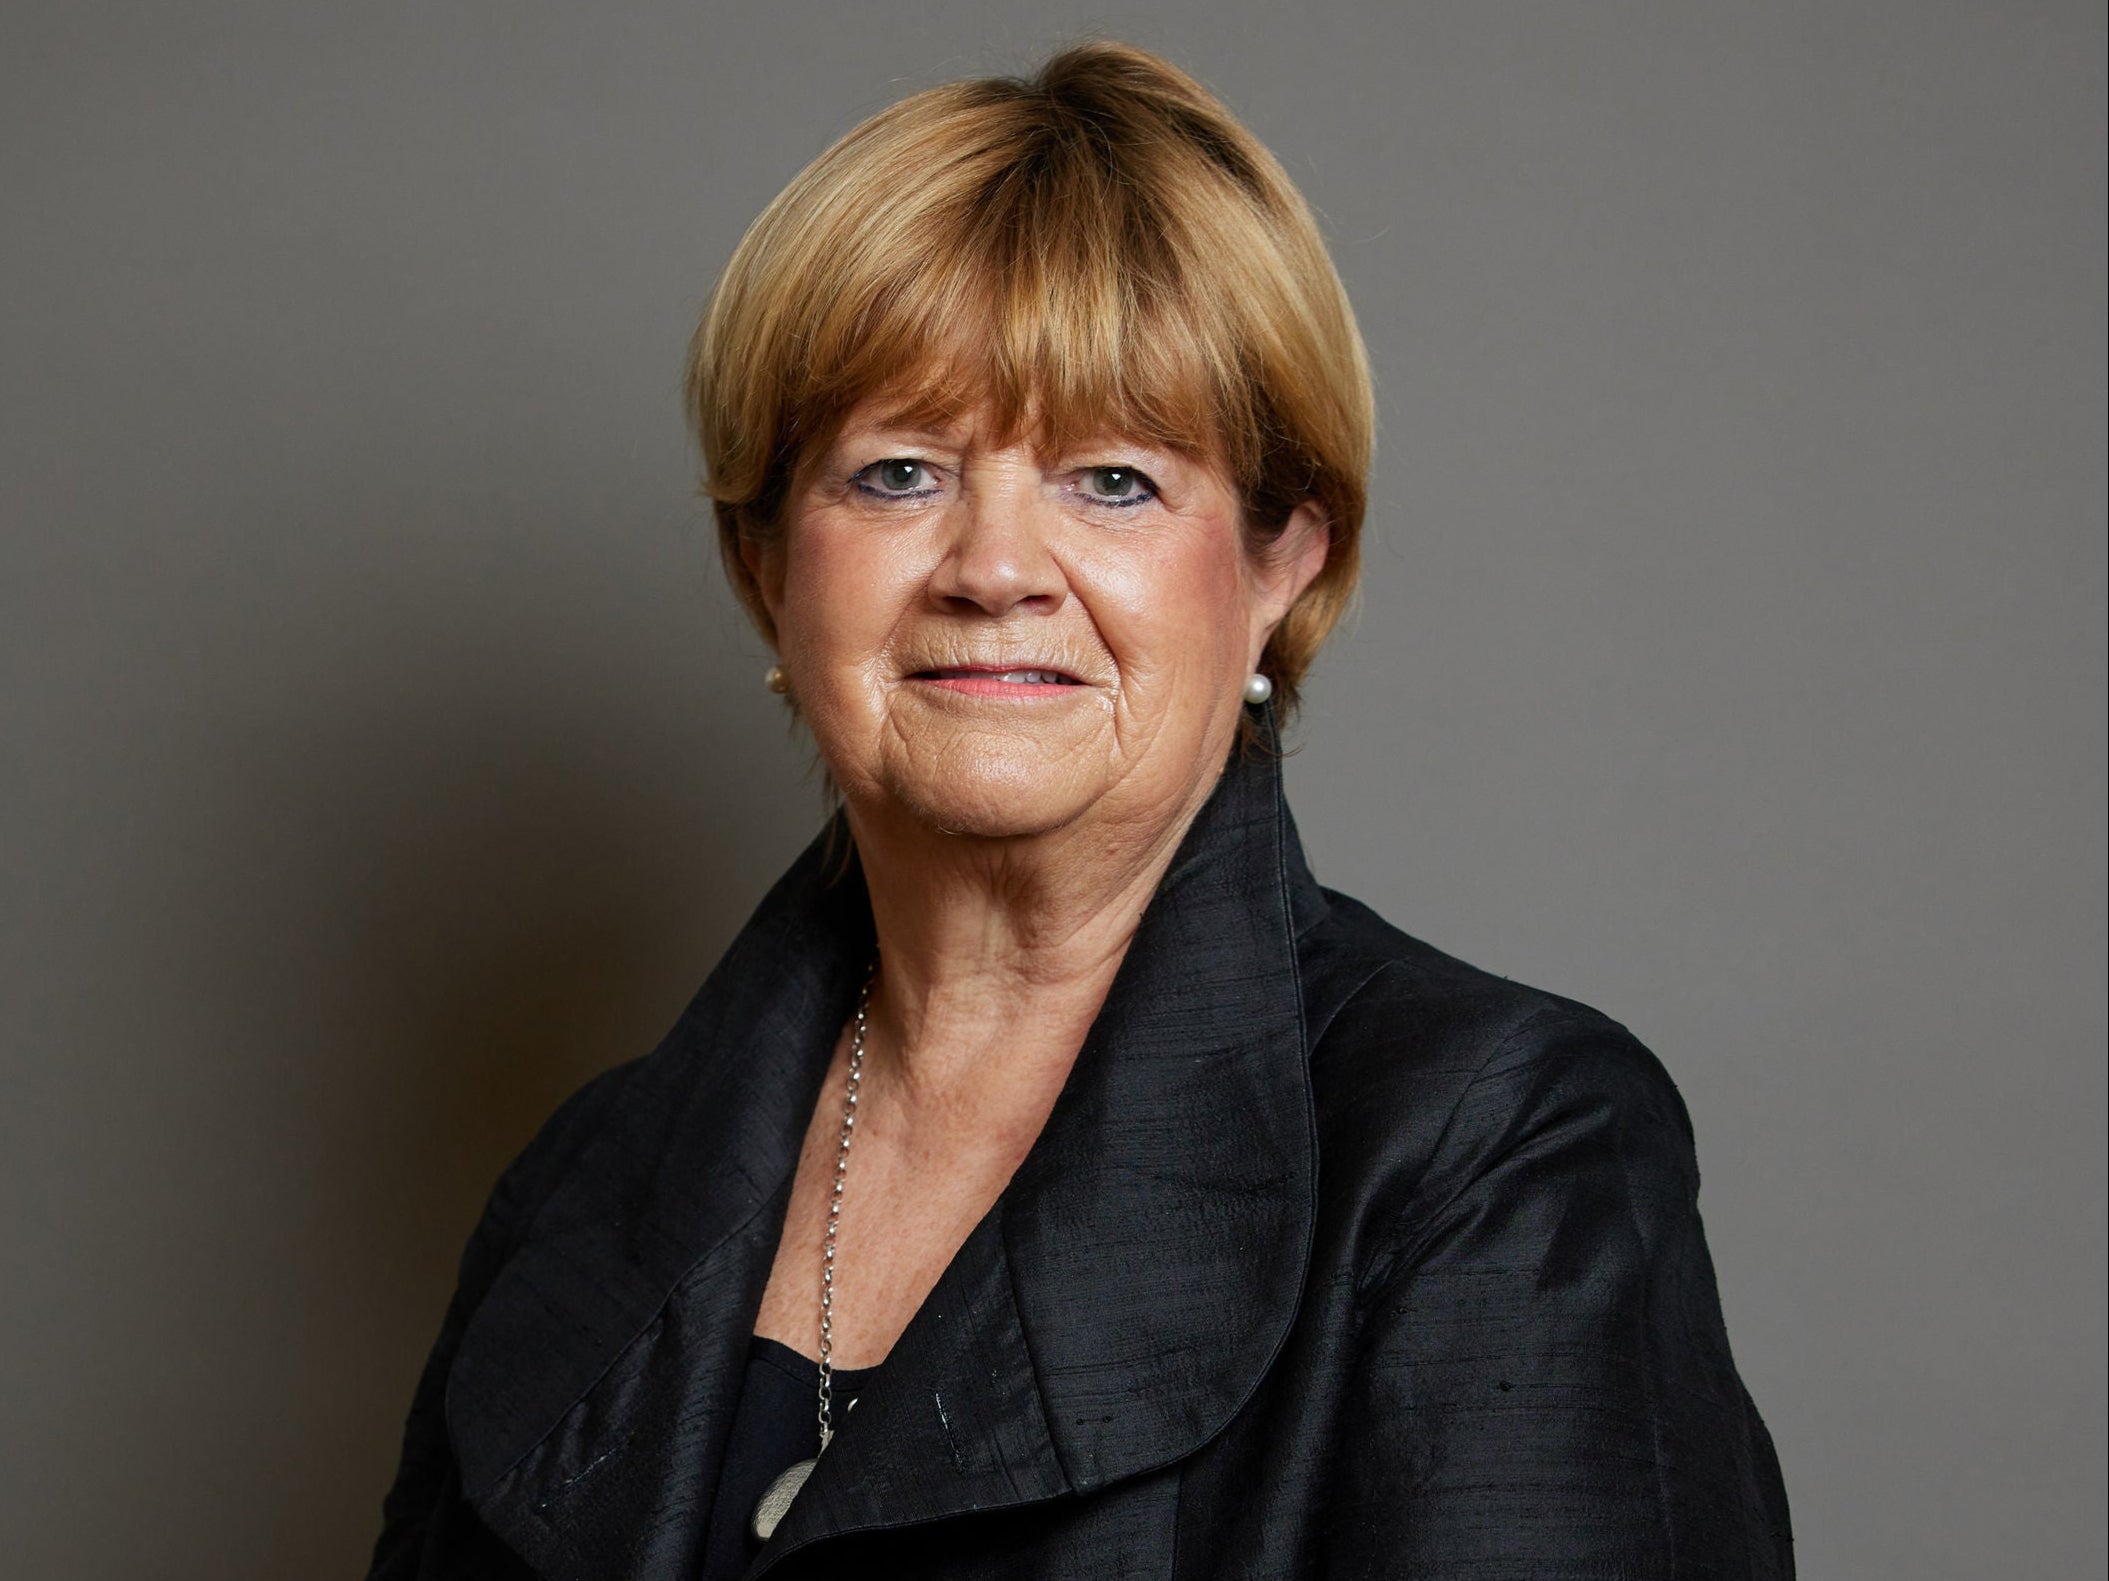 Baroness Hallett is a former appeal court judge